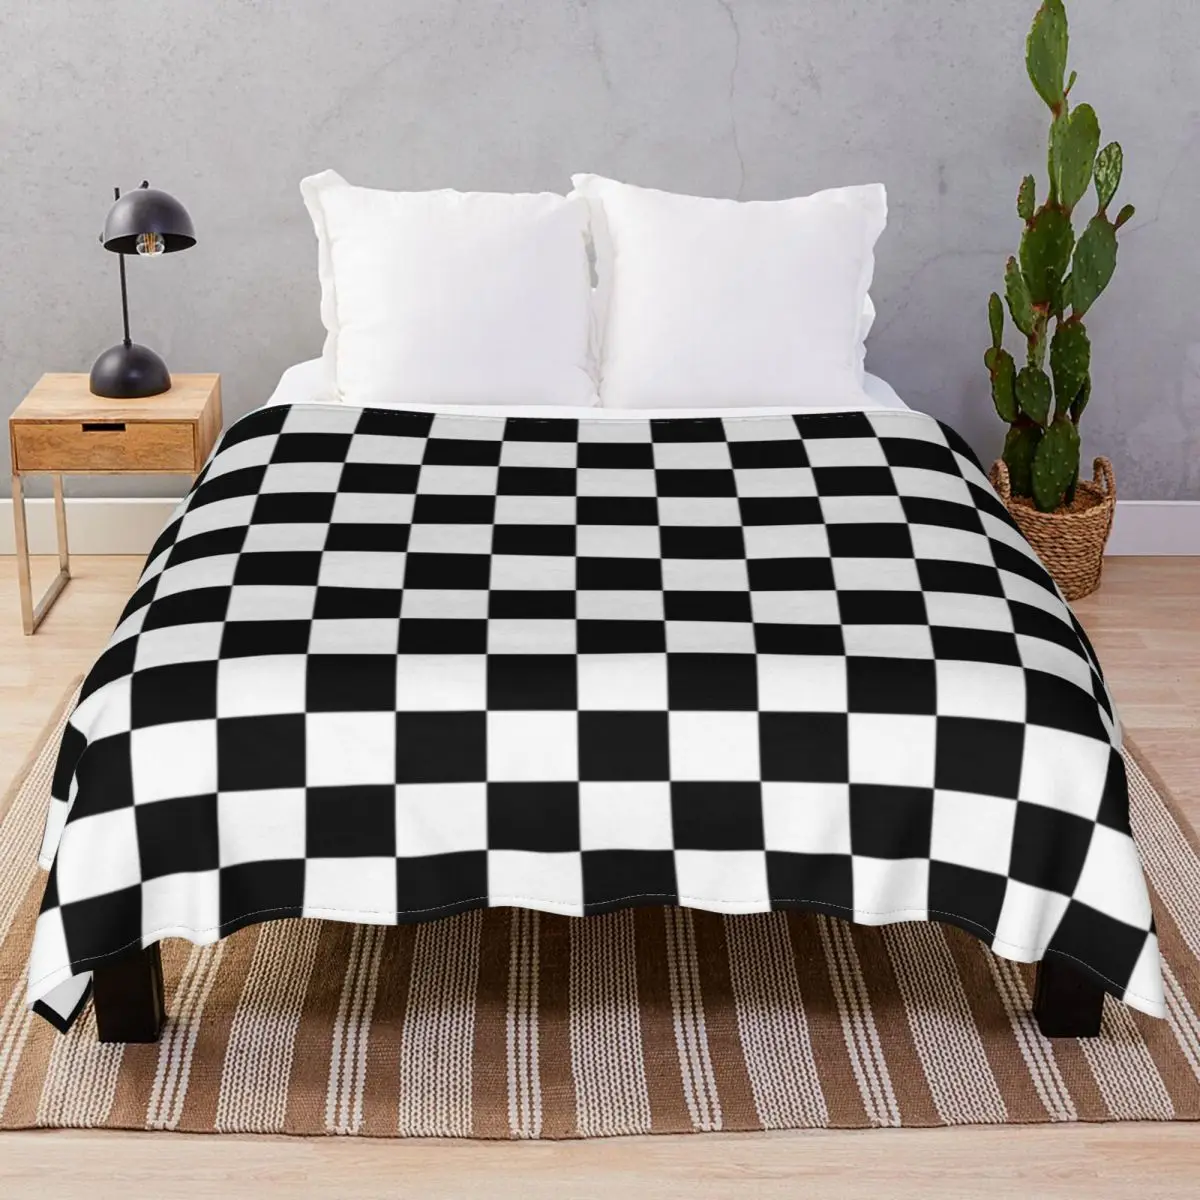 Black And White Checkered Blanket Fleece All Season Portable Throw Blankets for Bedding Home Couch Travel Cinema